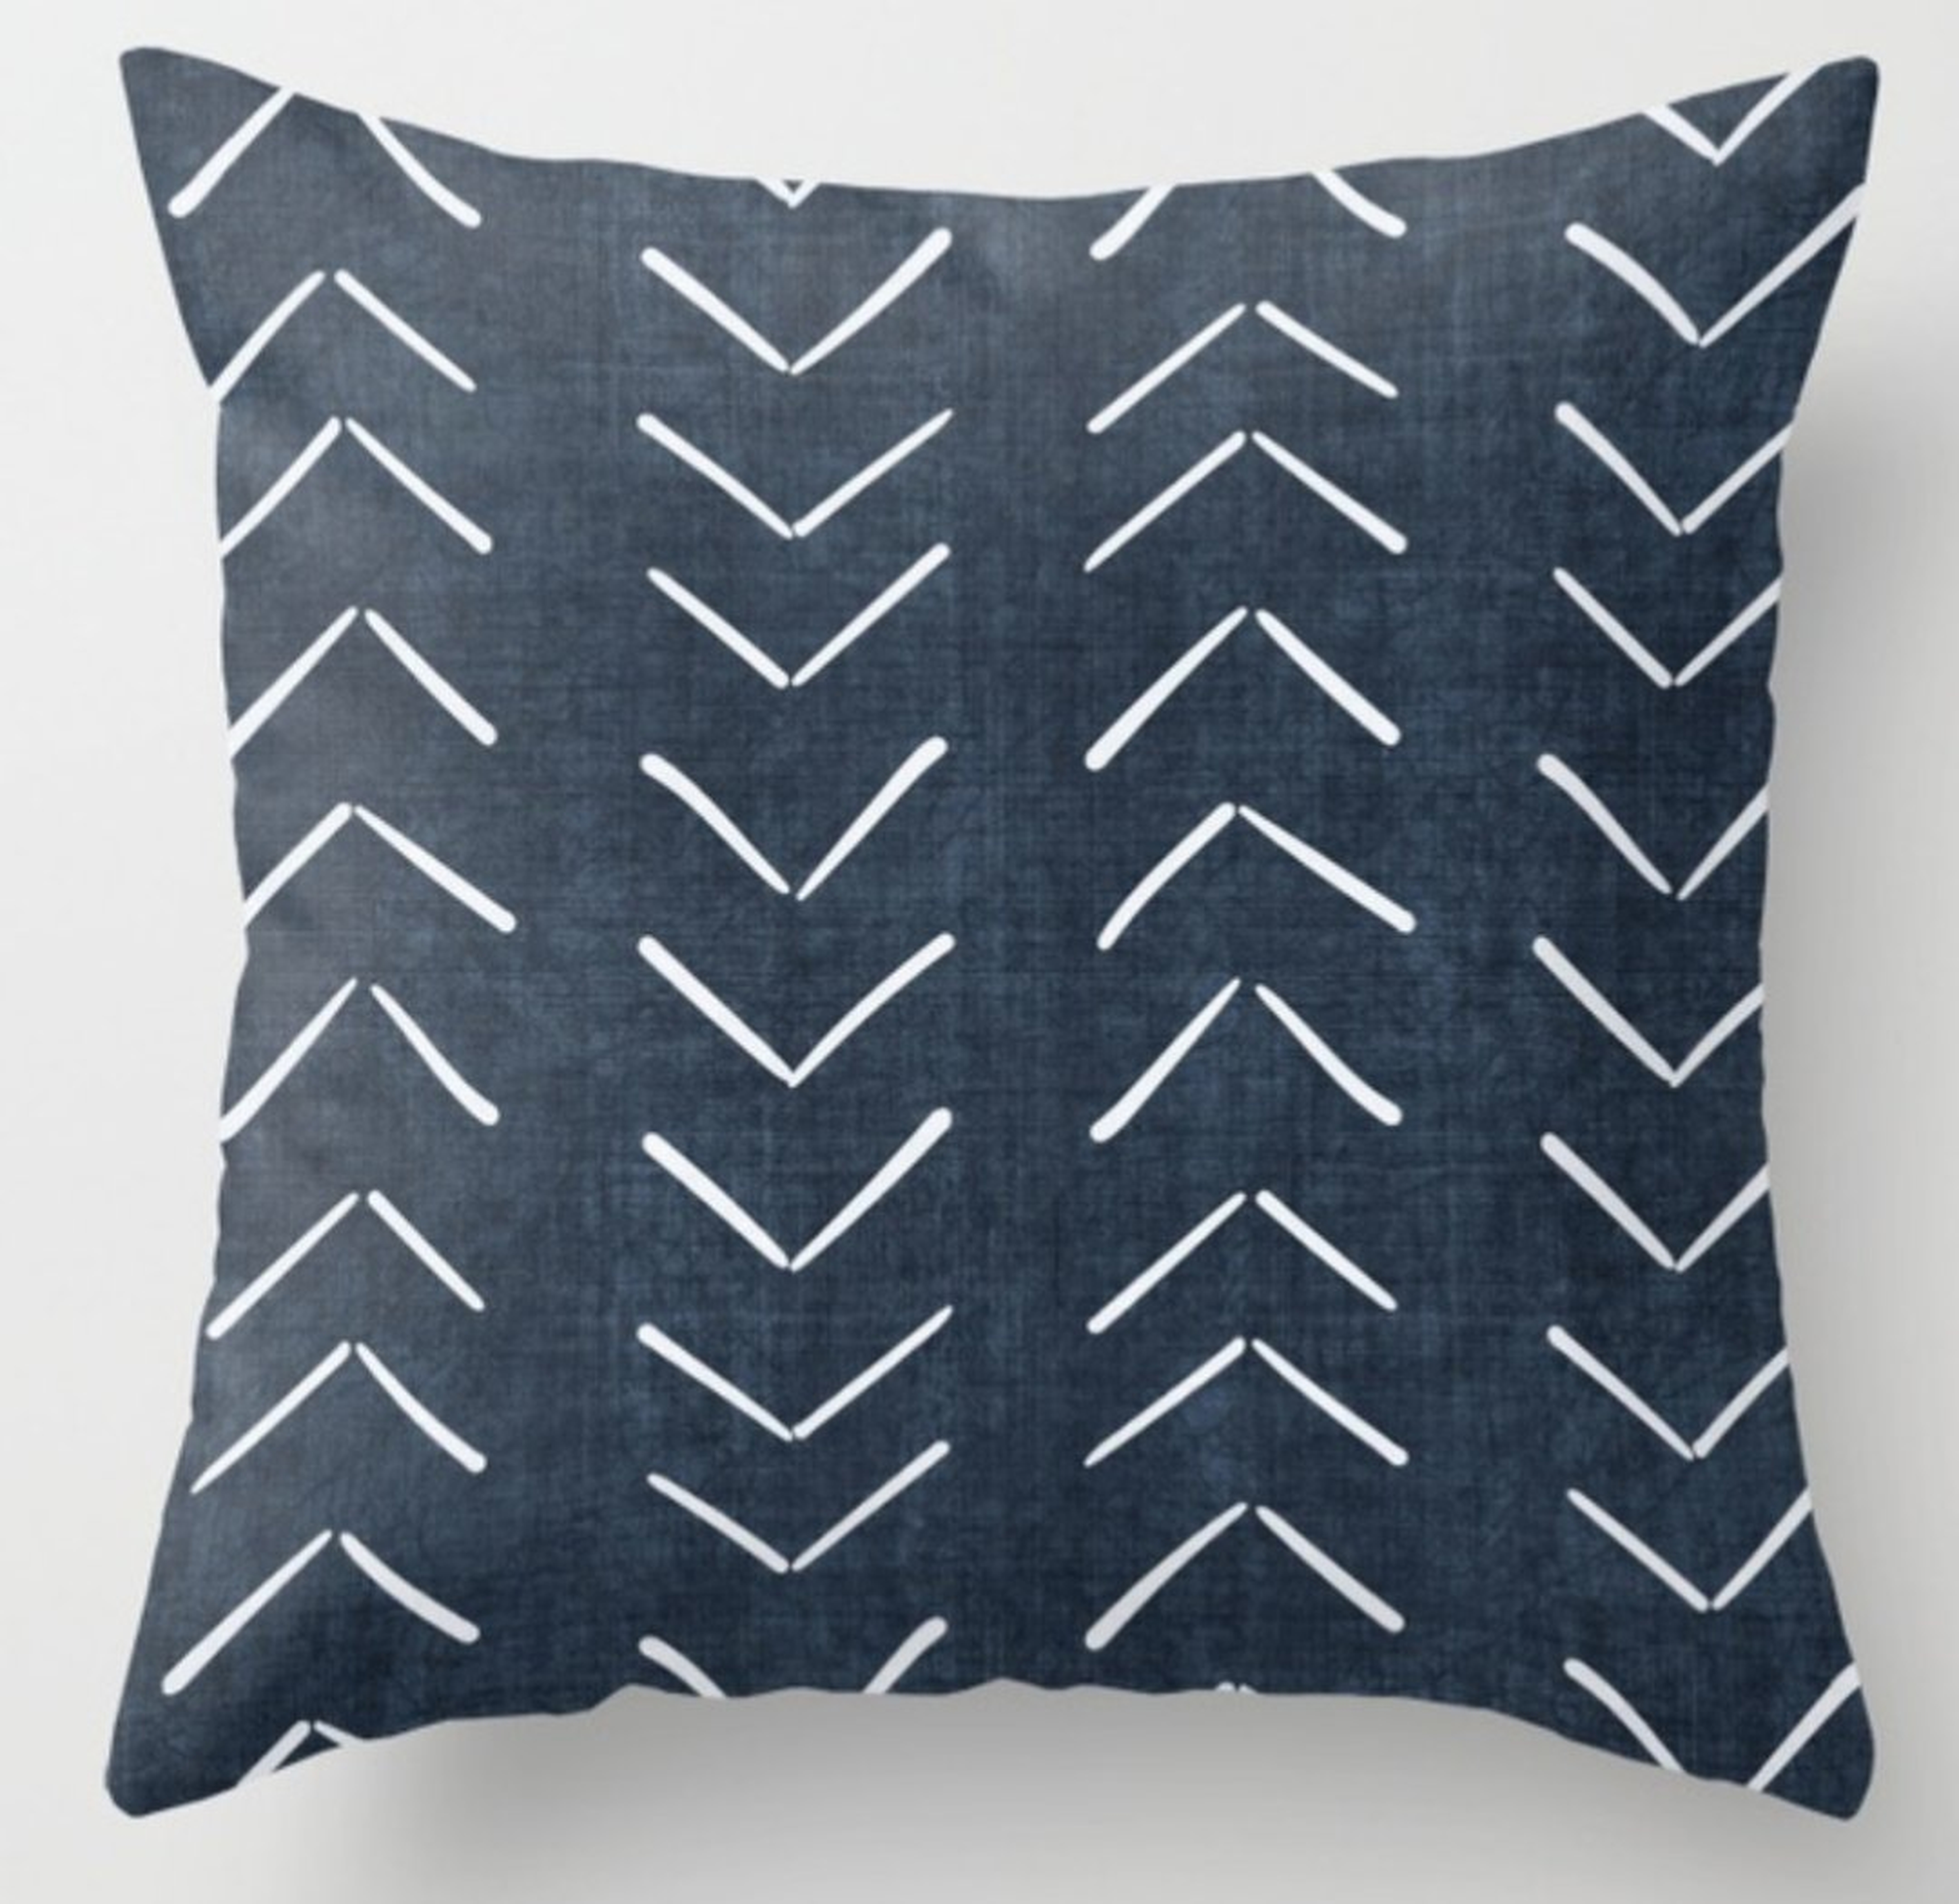 Boho Big Arrows In Navy Throw Pillow by House Of Haha - Cover (20" x 20") With Pillow Insert - Indoor Pillow - Society6